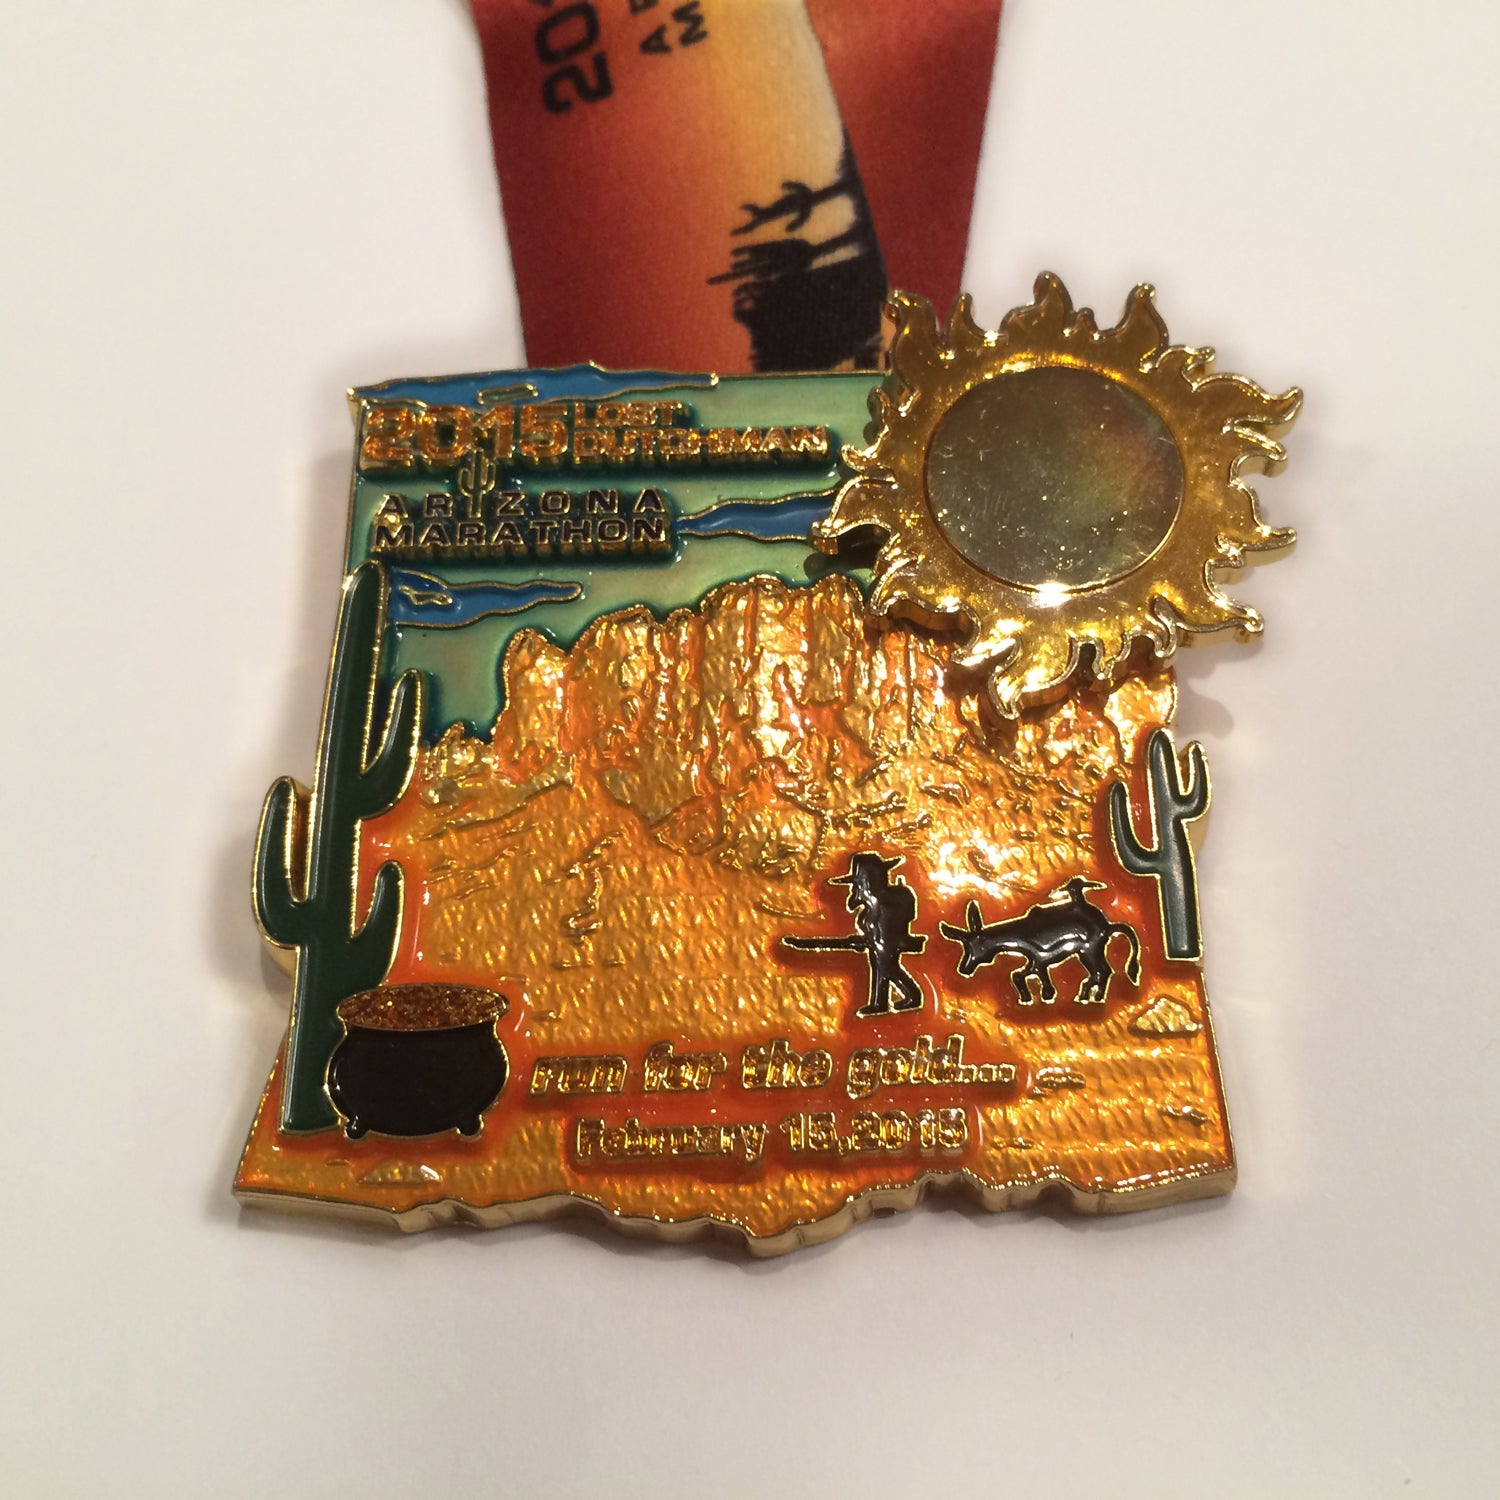 Solera: It’s fitting that a race that runs through the burnt reds and oranges of the southwestern desert under a perfect blue sky should have a colorful medal. Organizers ditched their usual subdued approach and went for a full explosion of color. As a novelty bonus, the sun’s heat rays rotate.